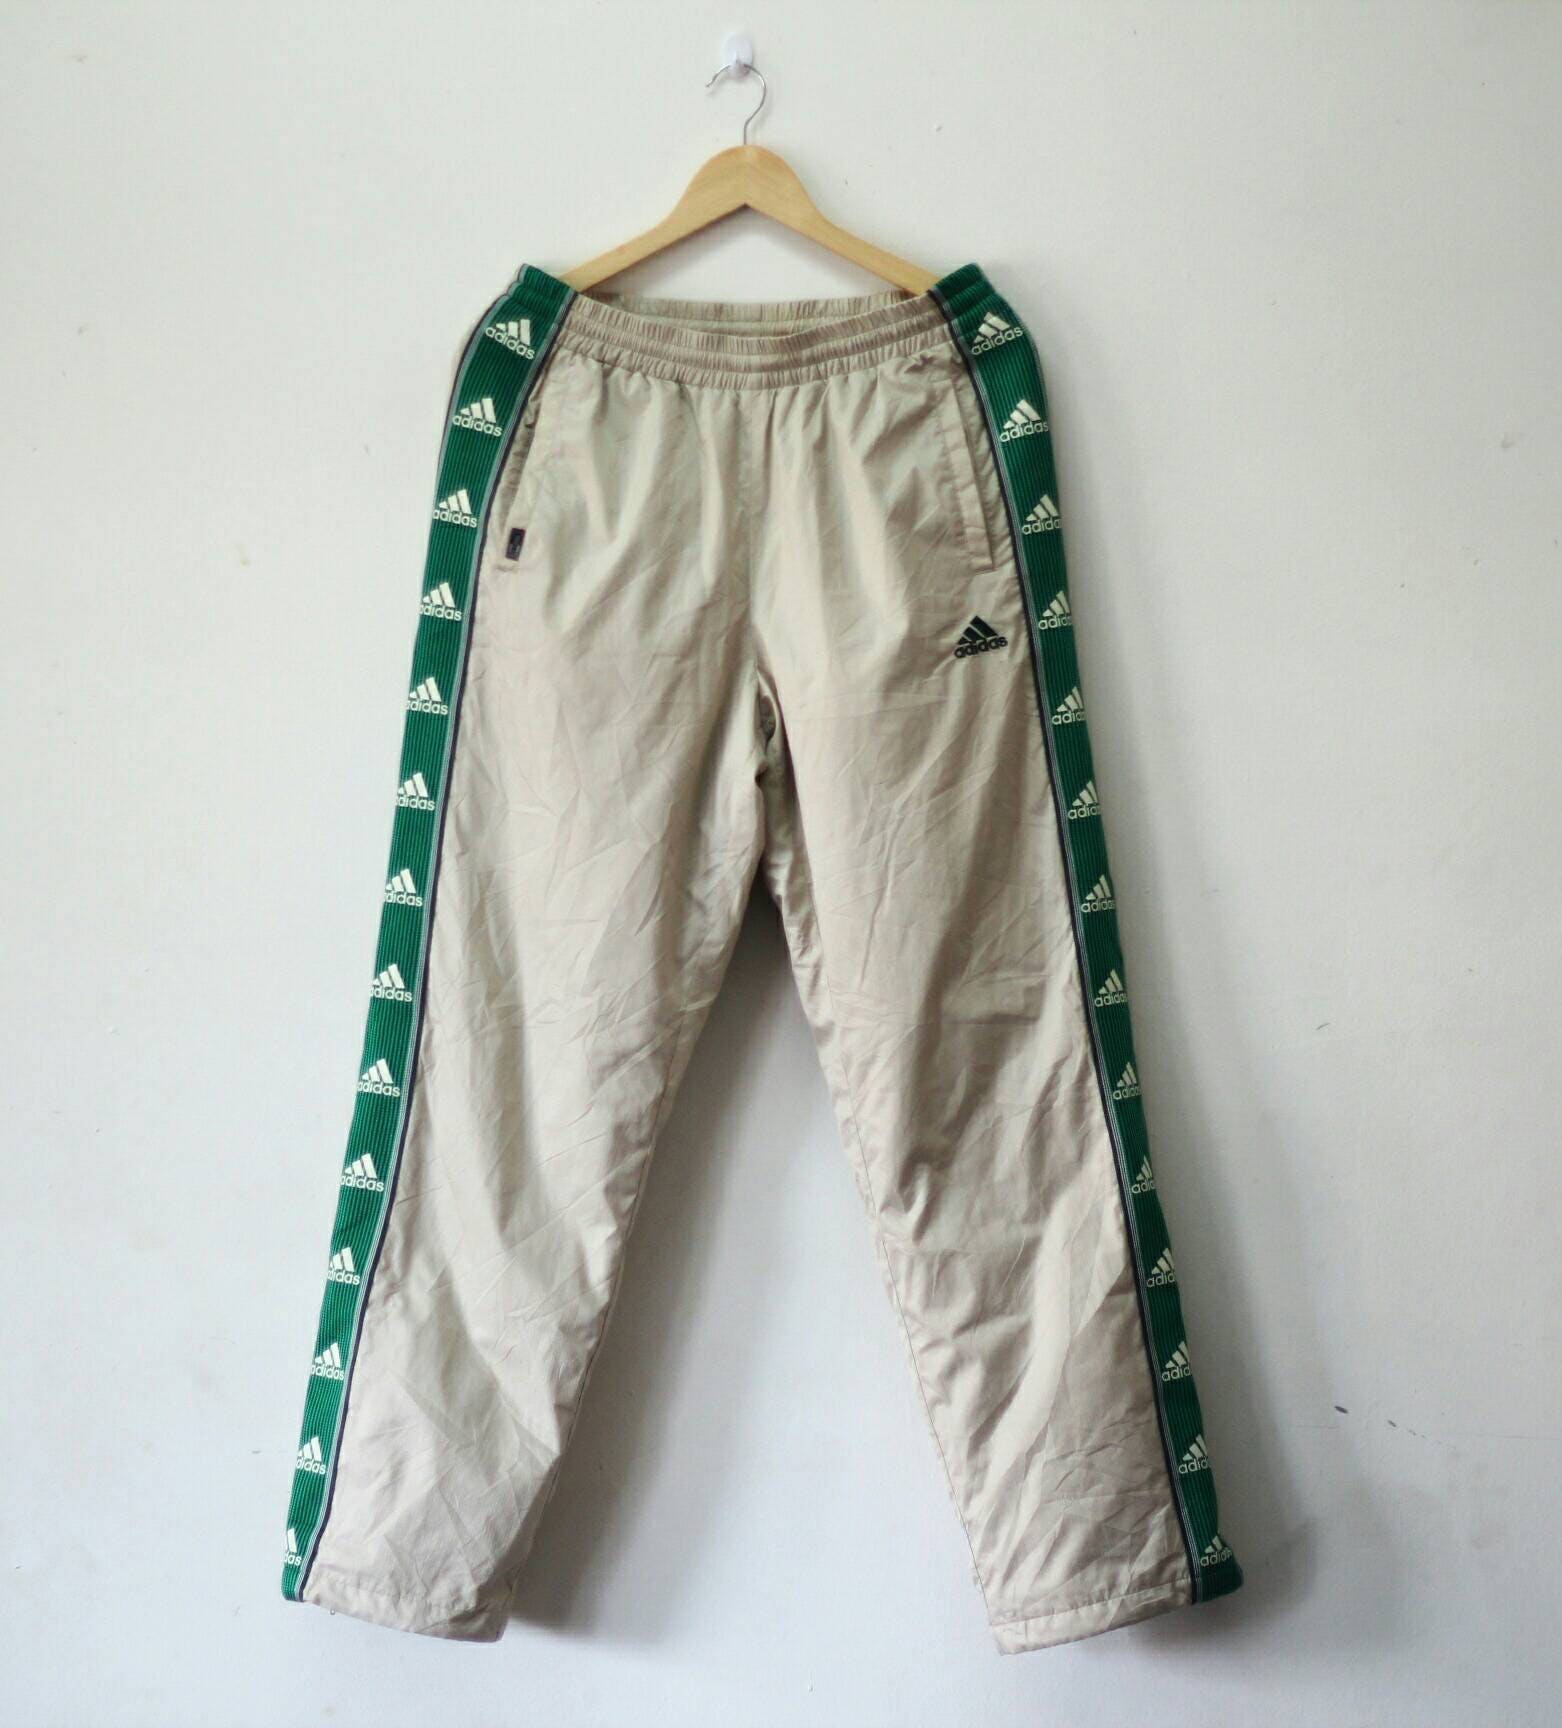 Adidas popper tracksuit bottoms from the 90s are fashionable again and  being sold in Plymouth - Plymouth Live